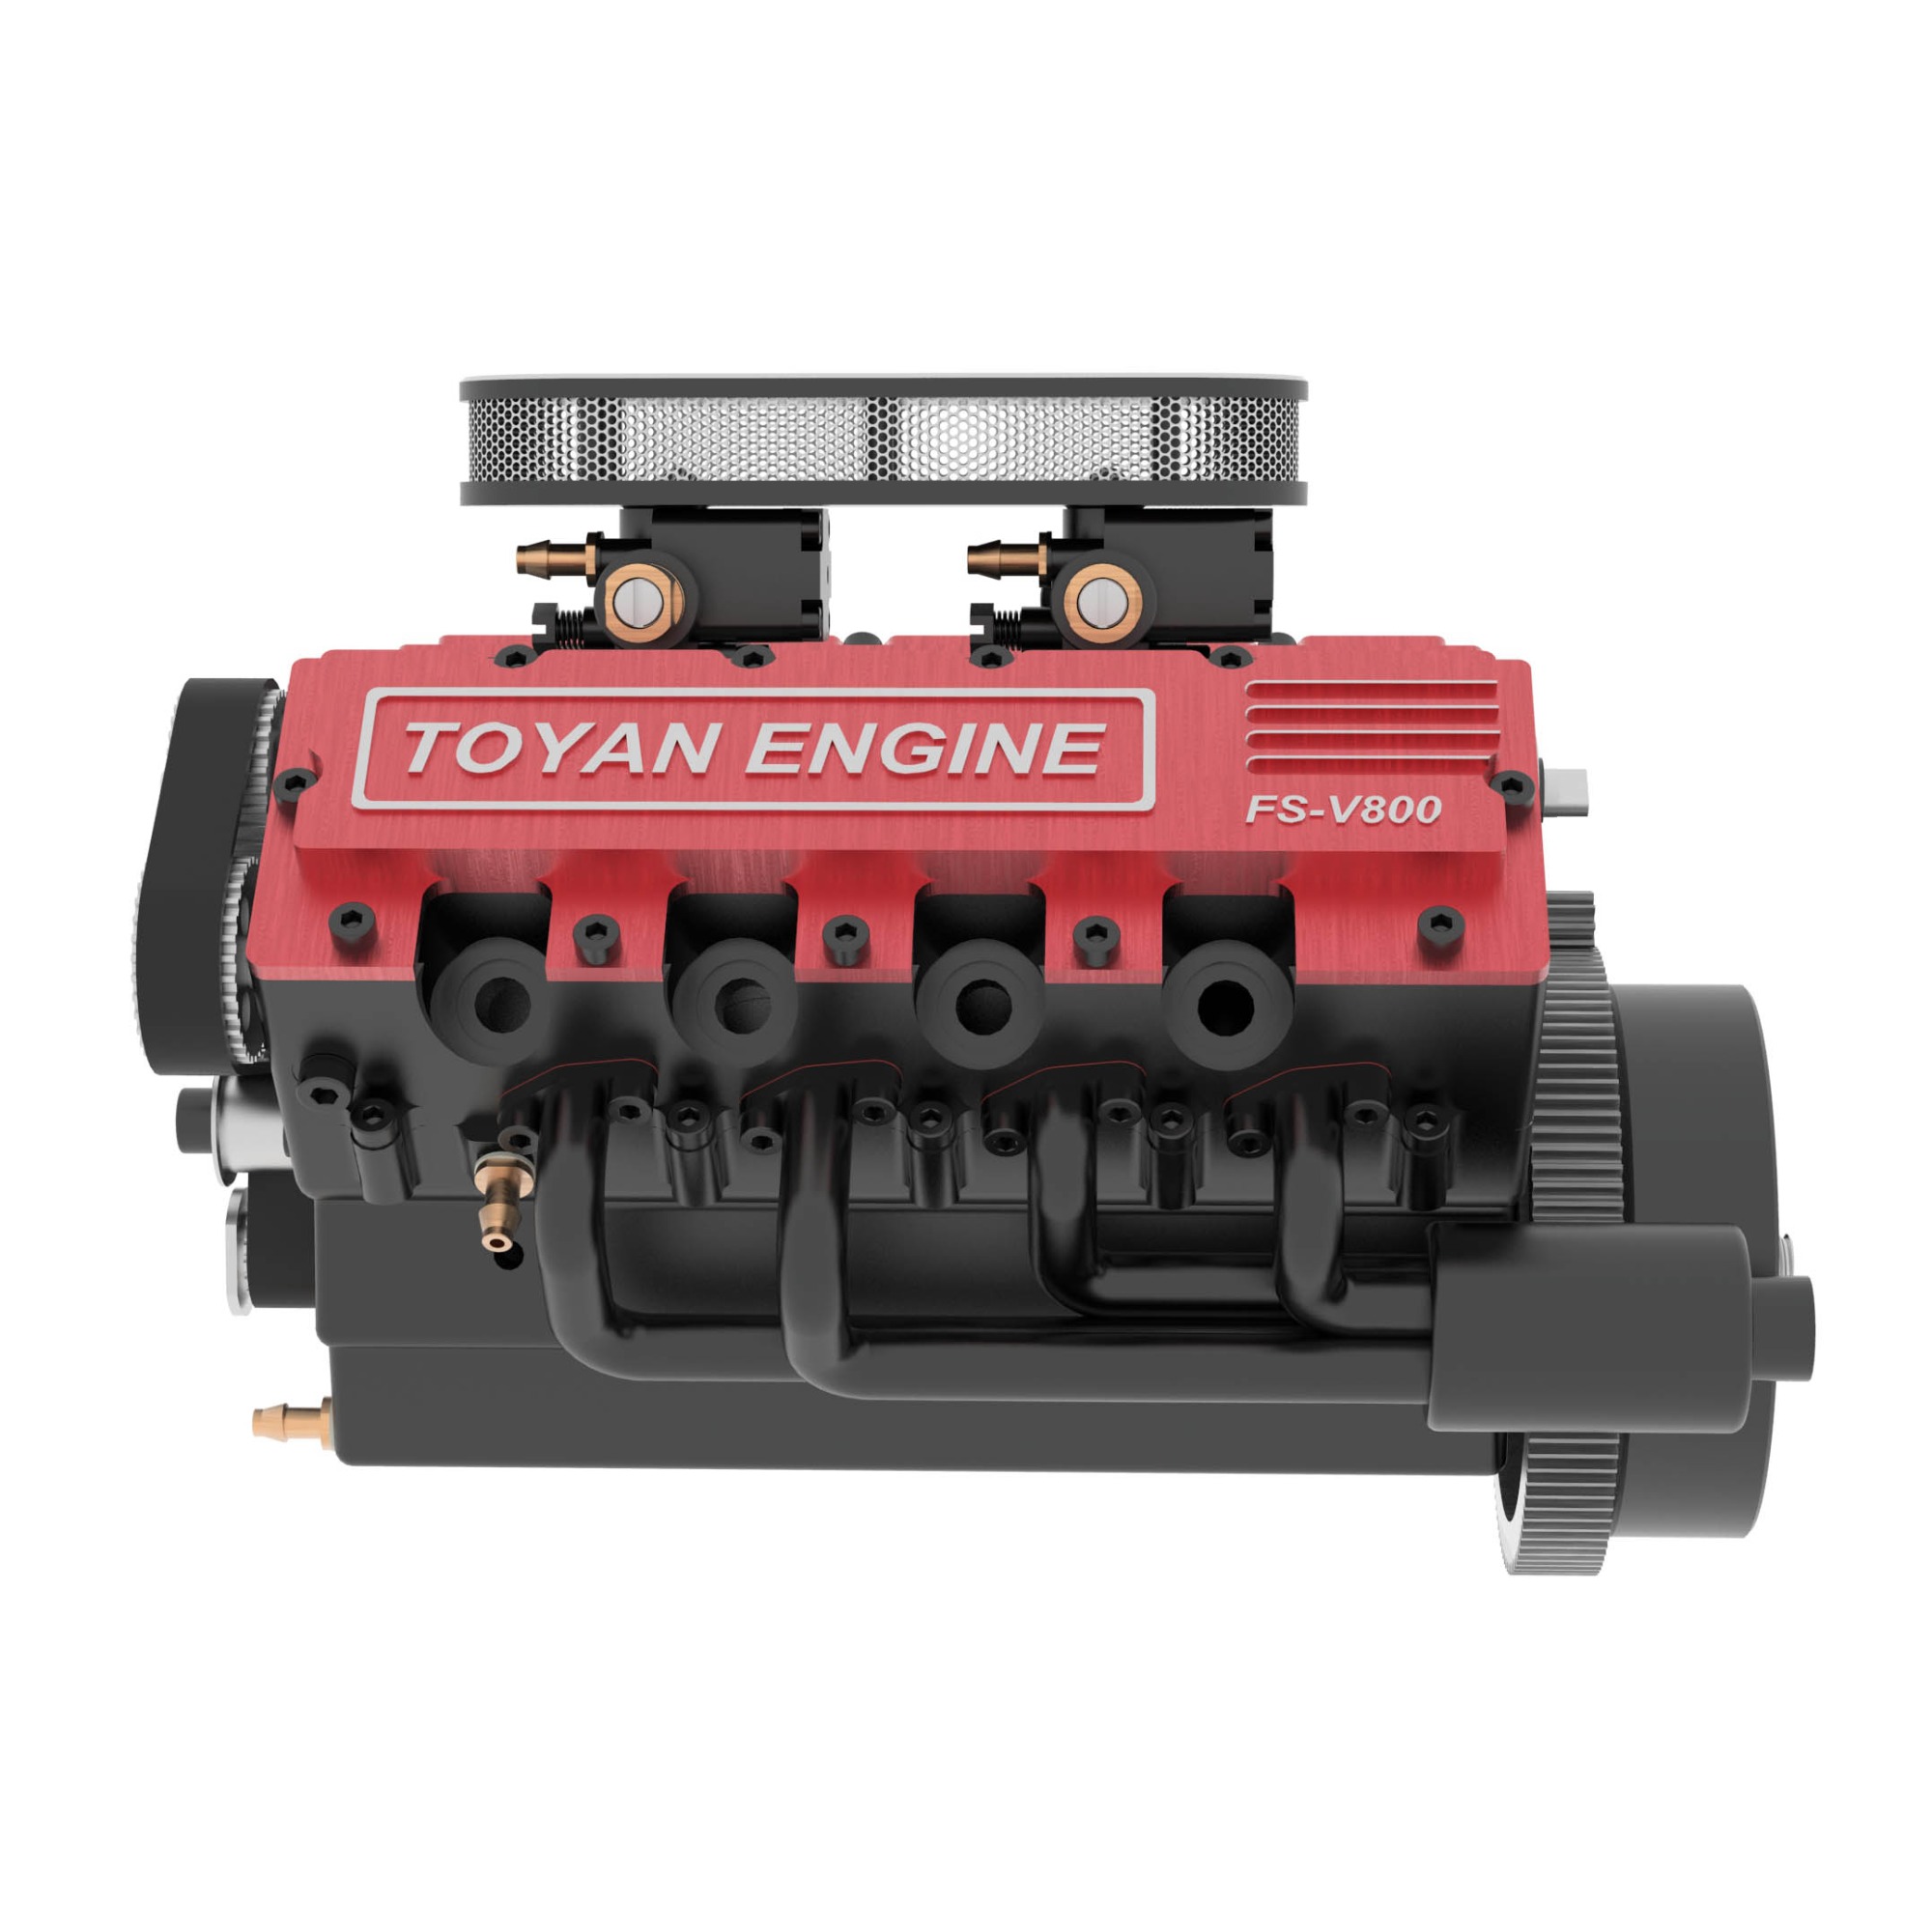 Toyan V8 Engine Specs, Building And Common Problems